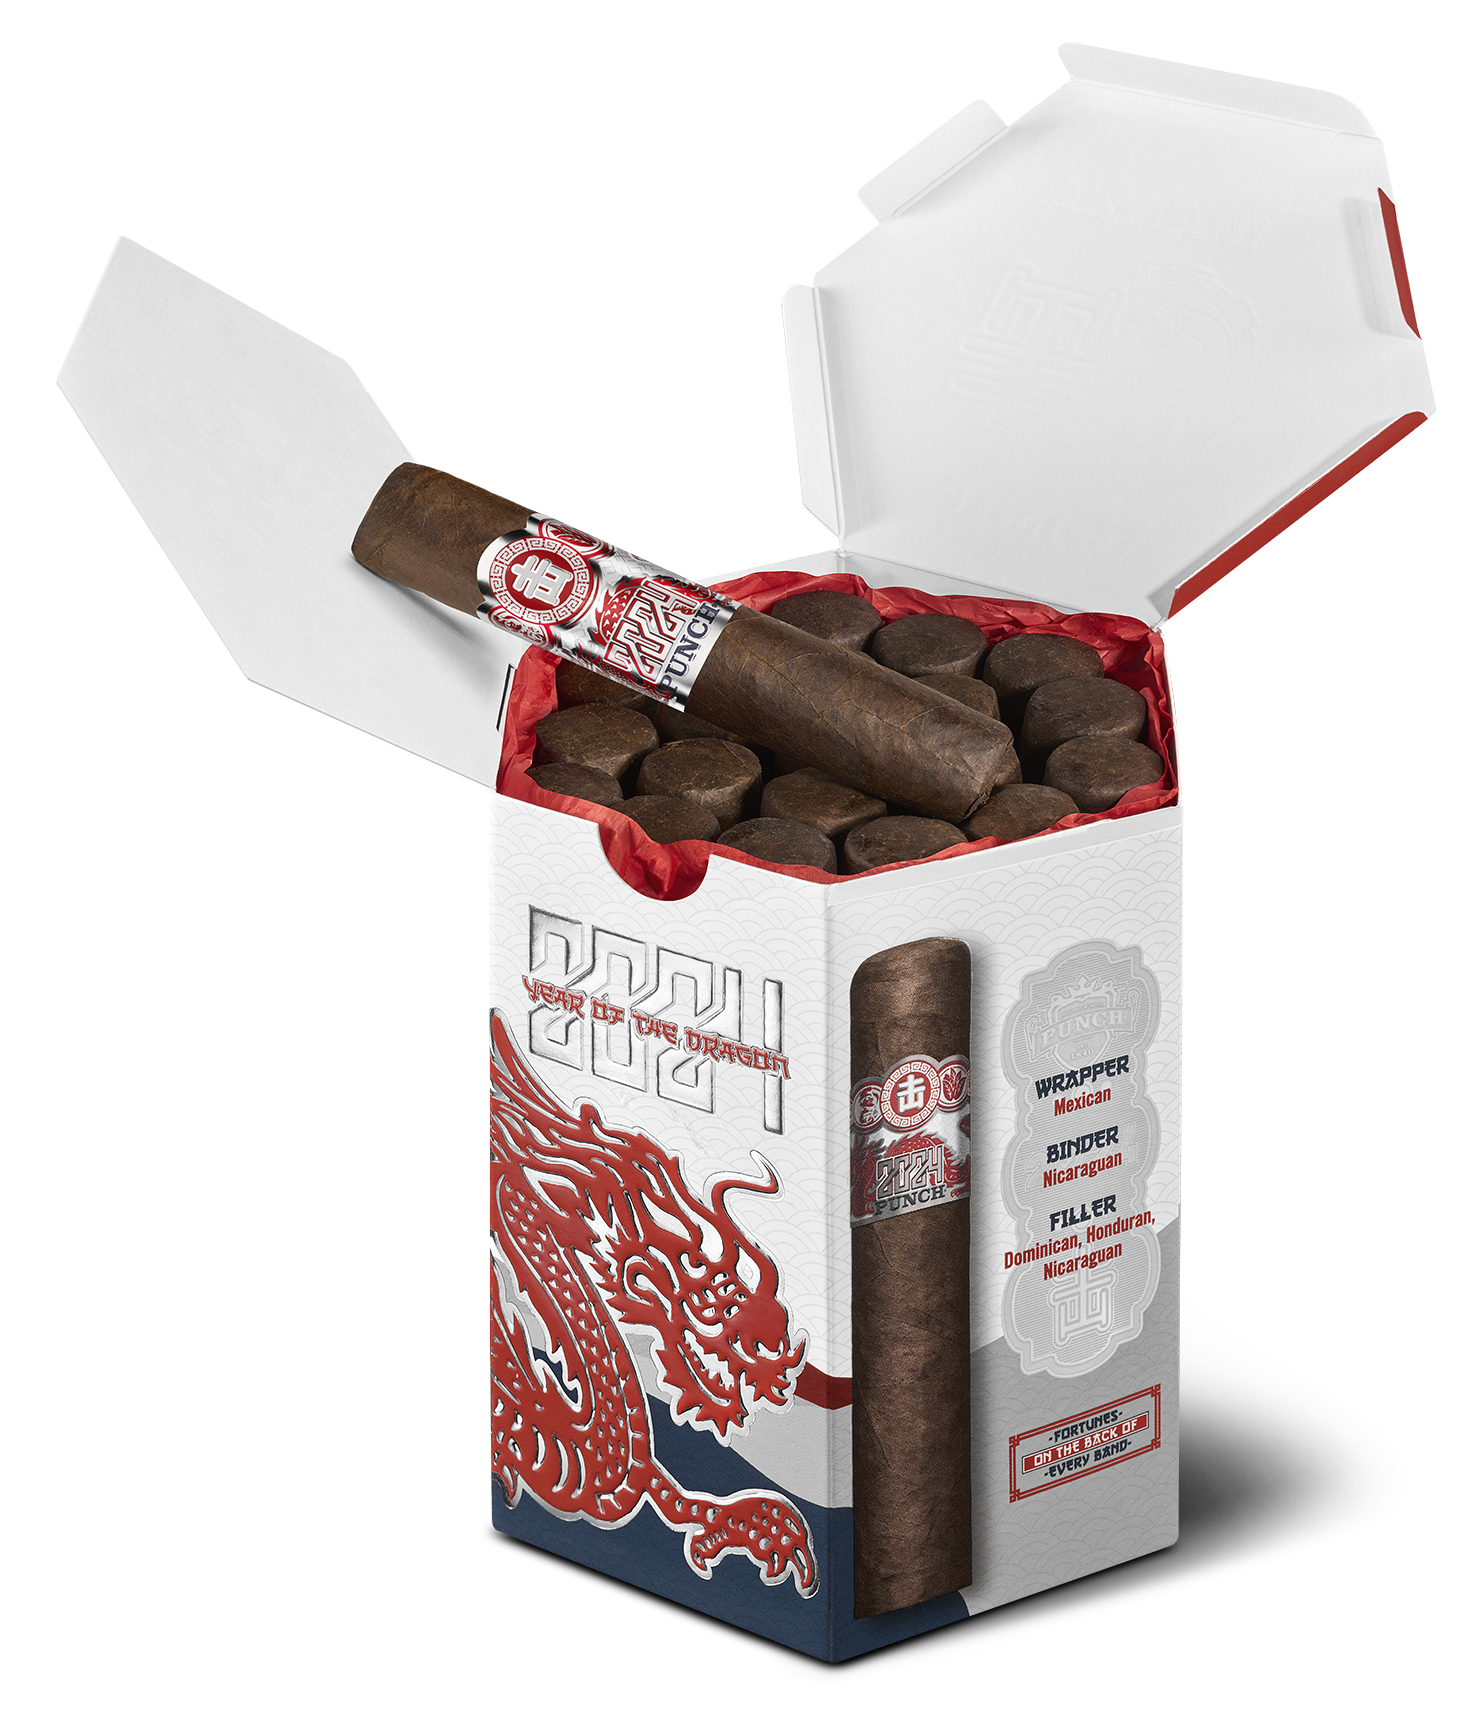 Punch Dragon Fire package cigar